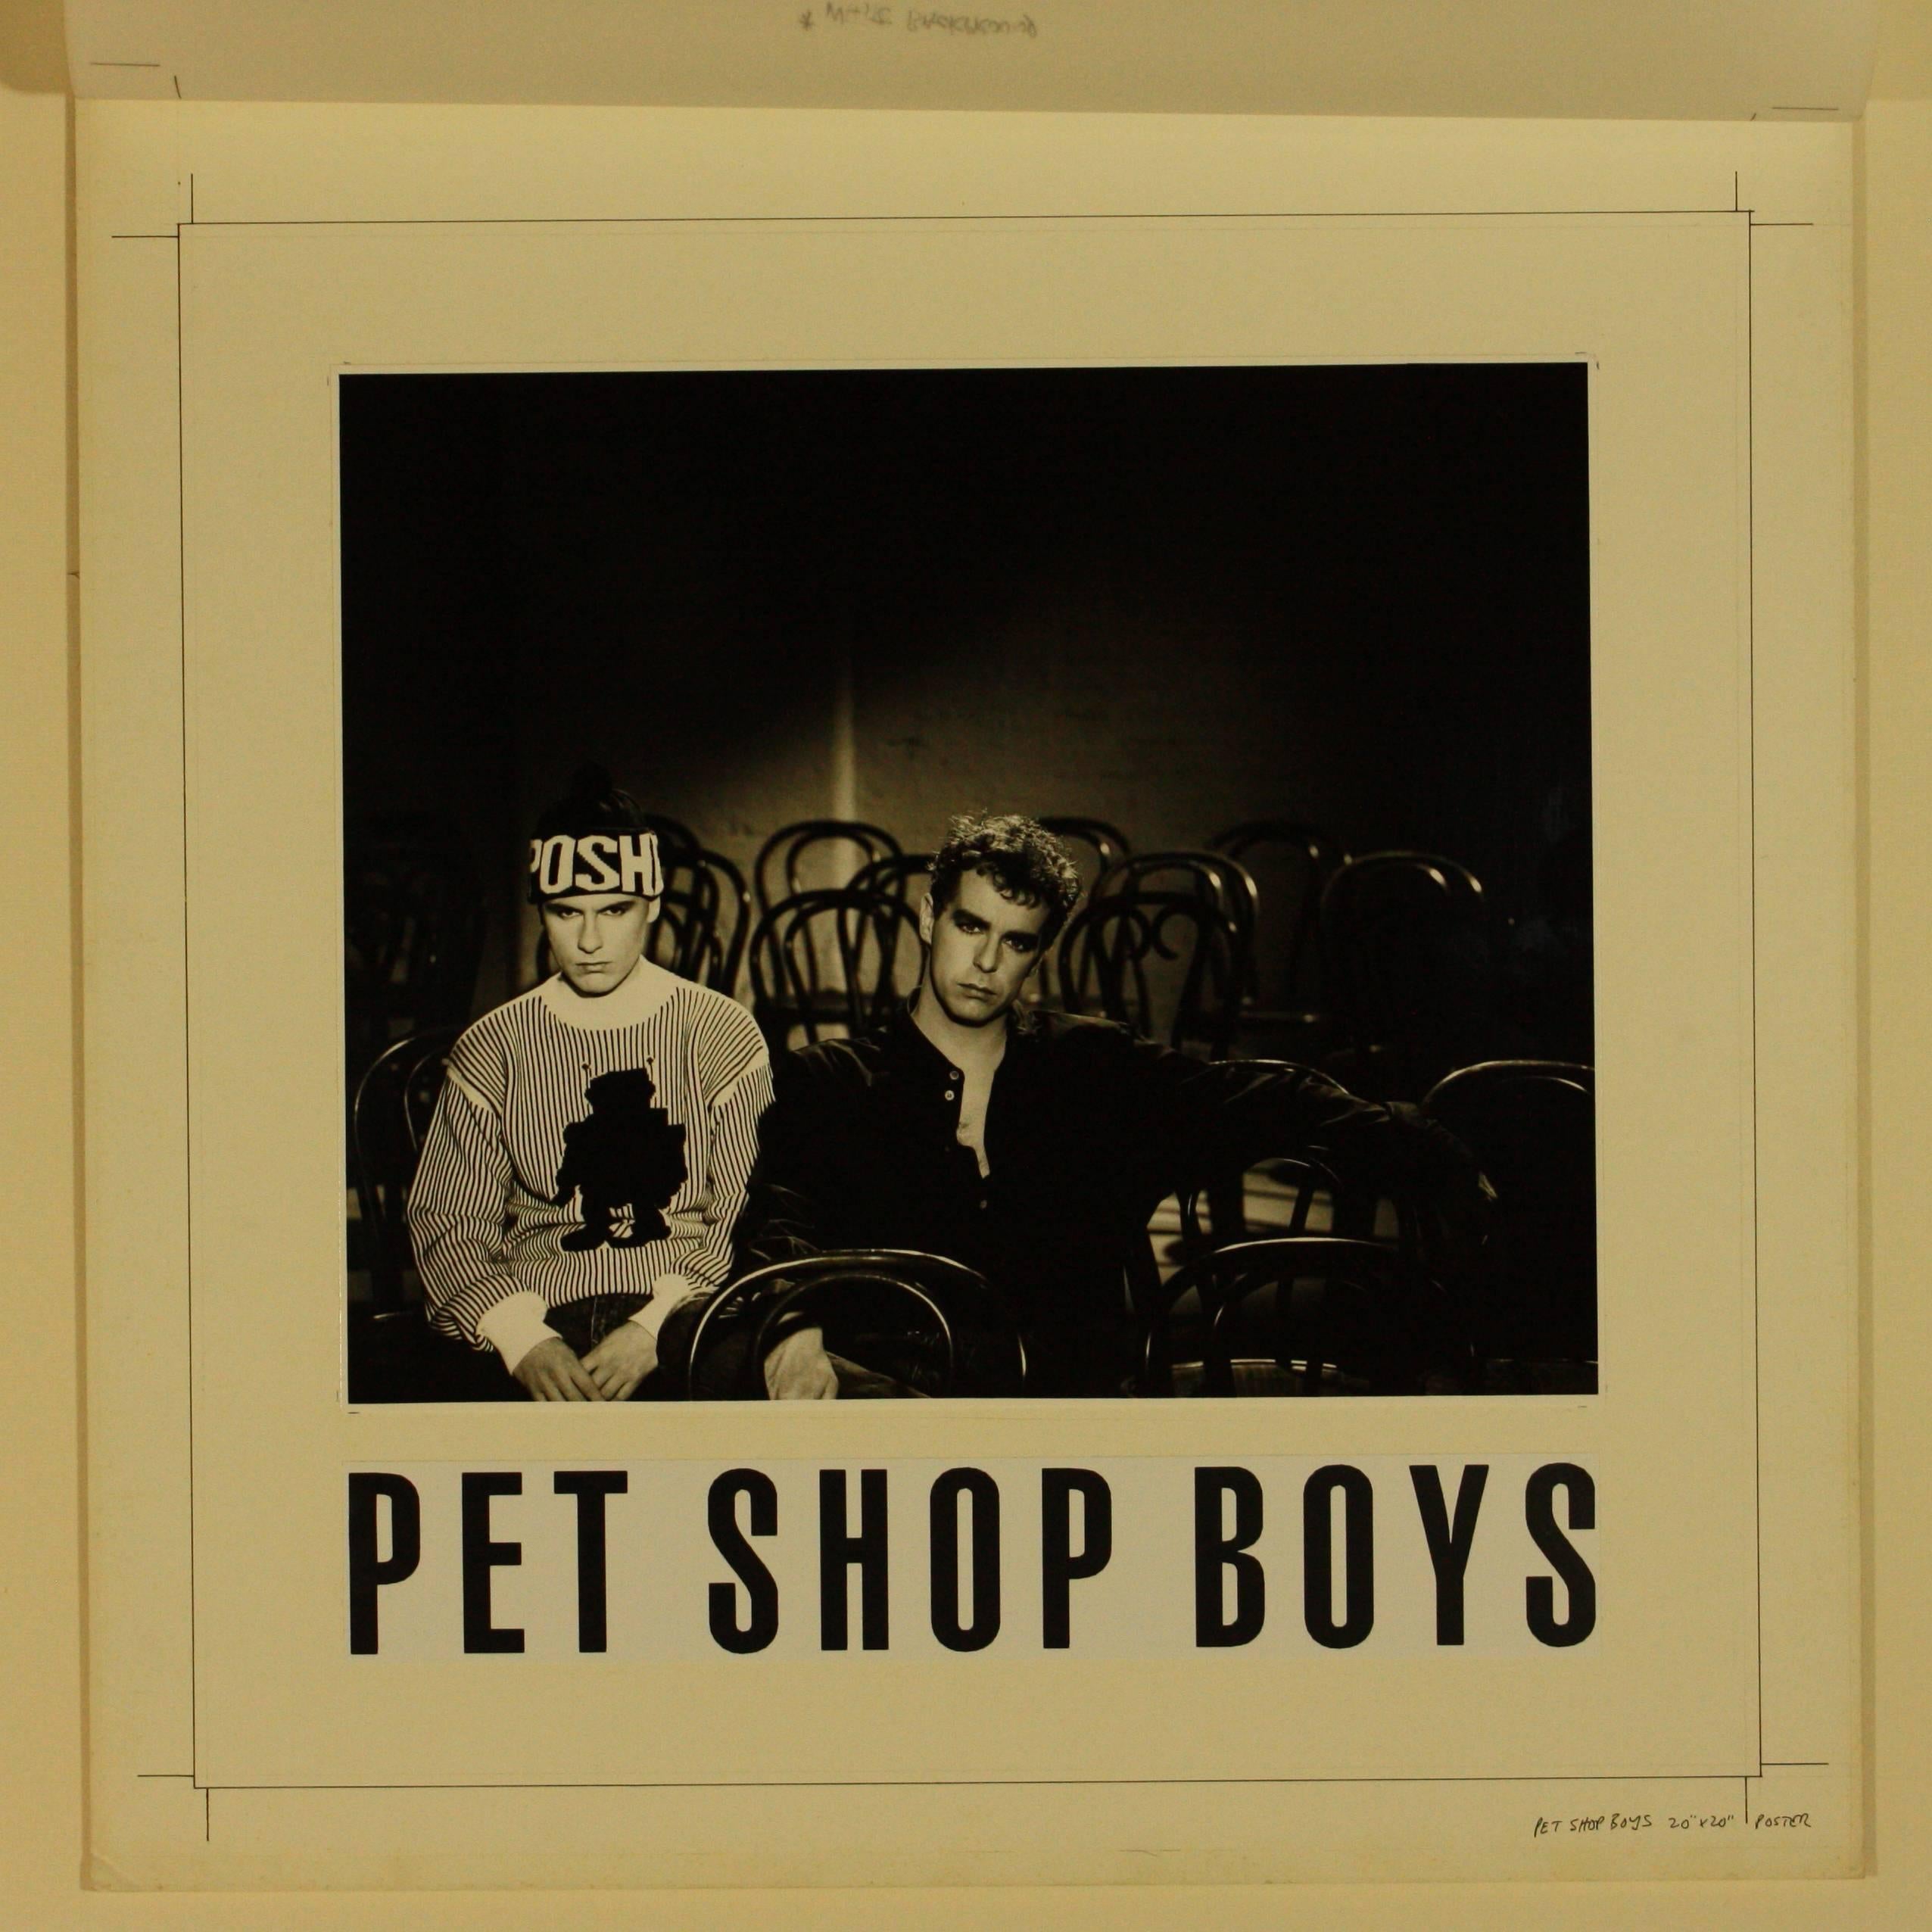 PET SHOP BOYS Cromalin for a Limited Edition Print - Photograph by Unknown